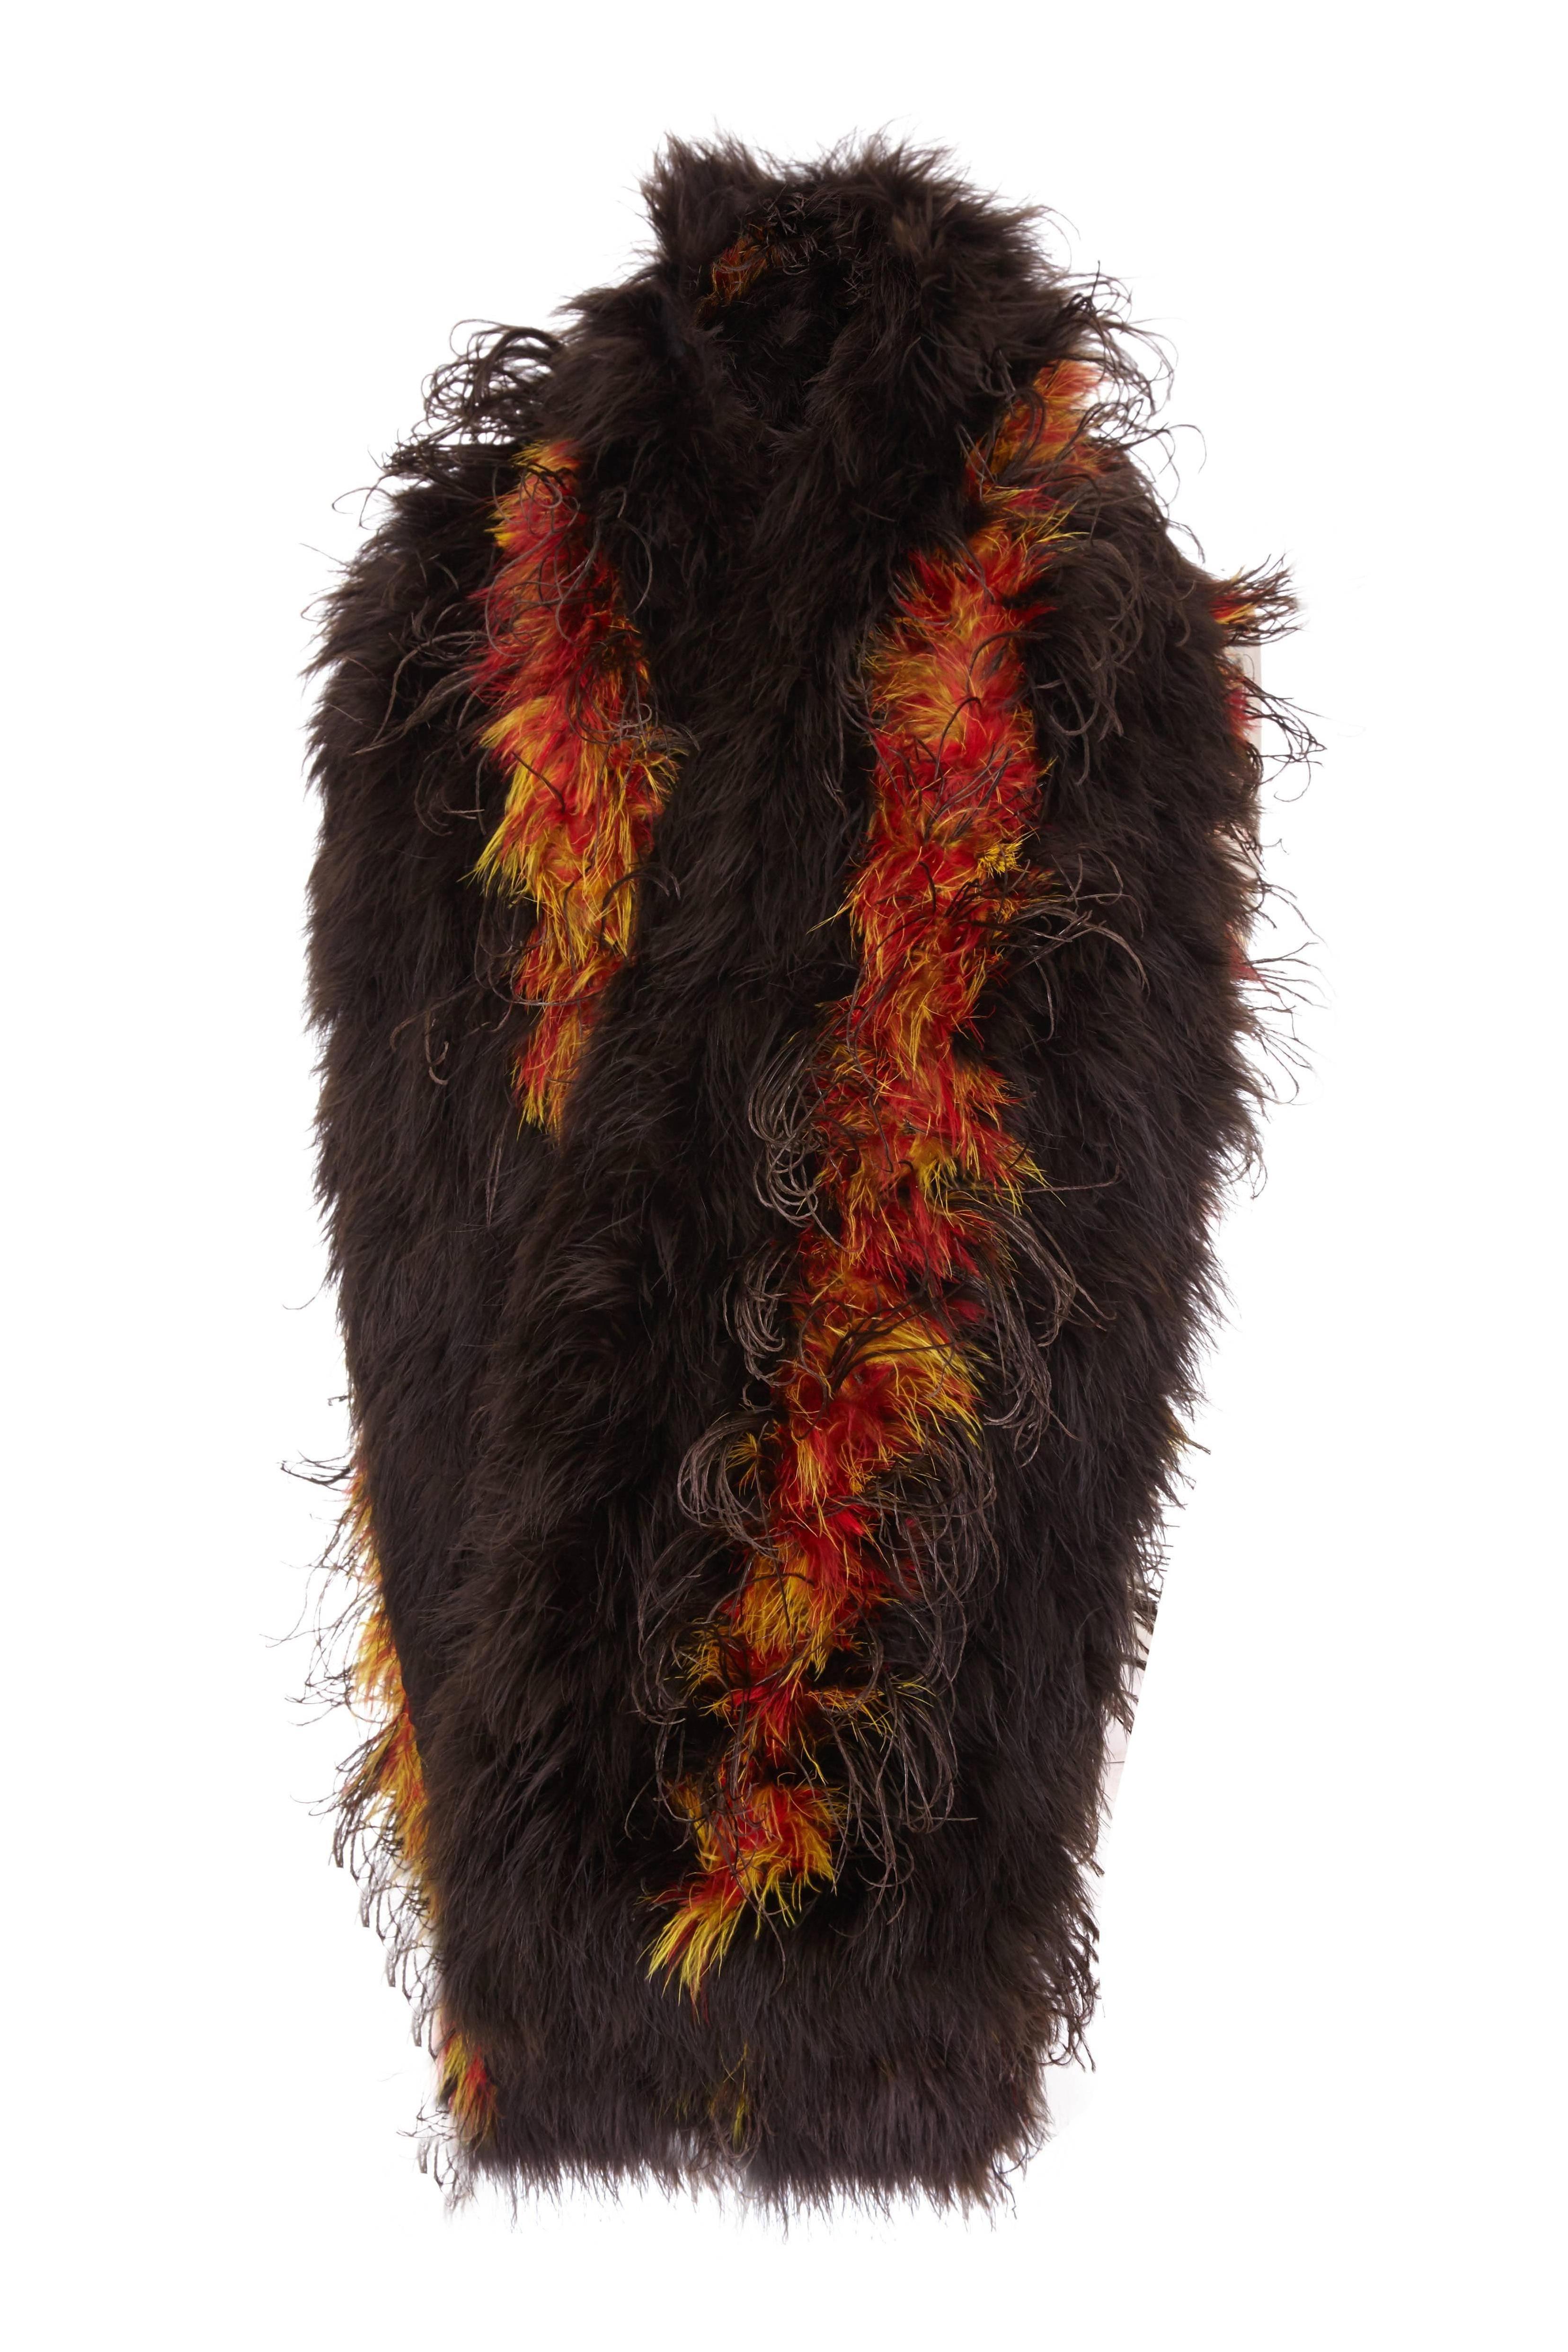 This is an entirely original 1920s marabou feather stole in wide sections of rich dark brown interspersed with a brighter mix of red, orange and yellow stripes of barbs. The look reminds me of a fire bird and these highlights have the more desirable